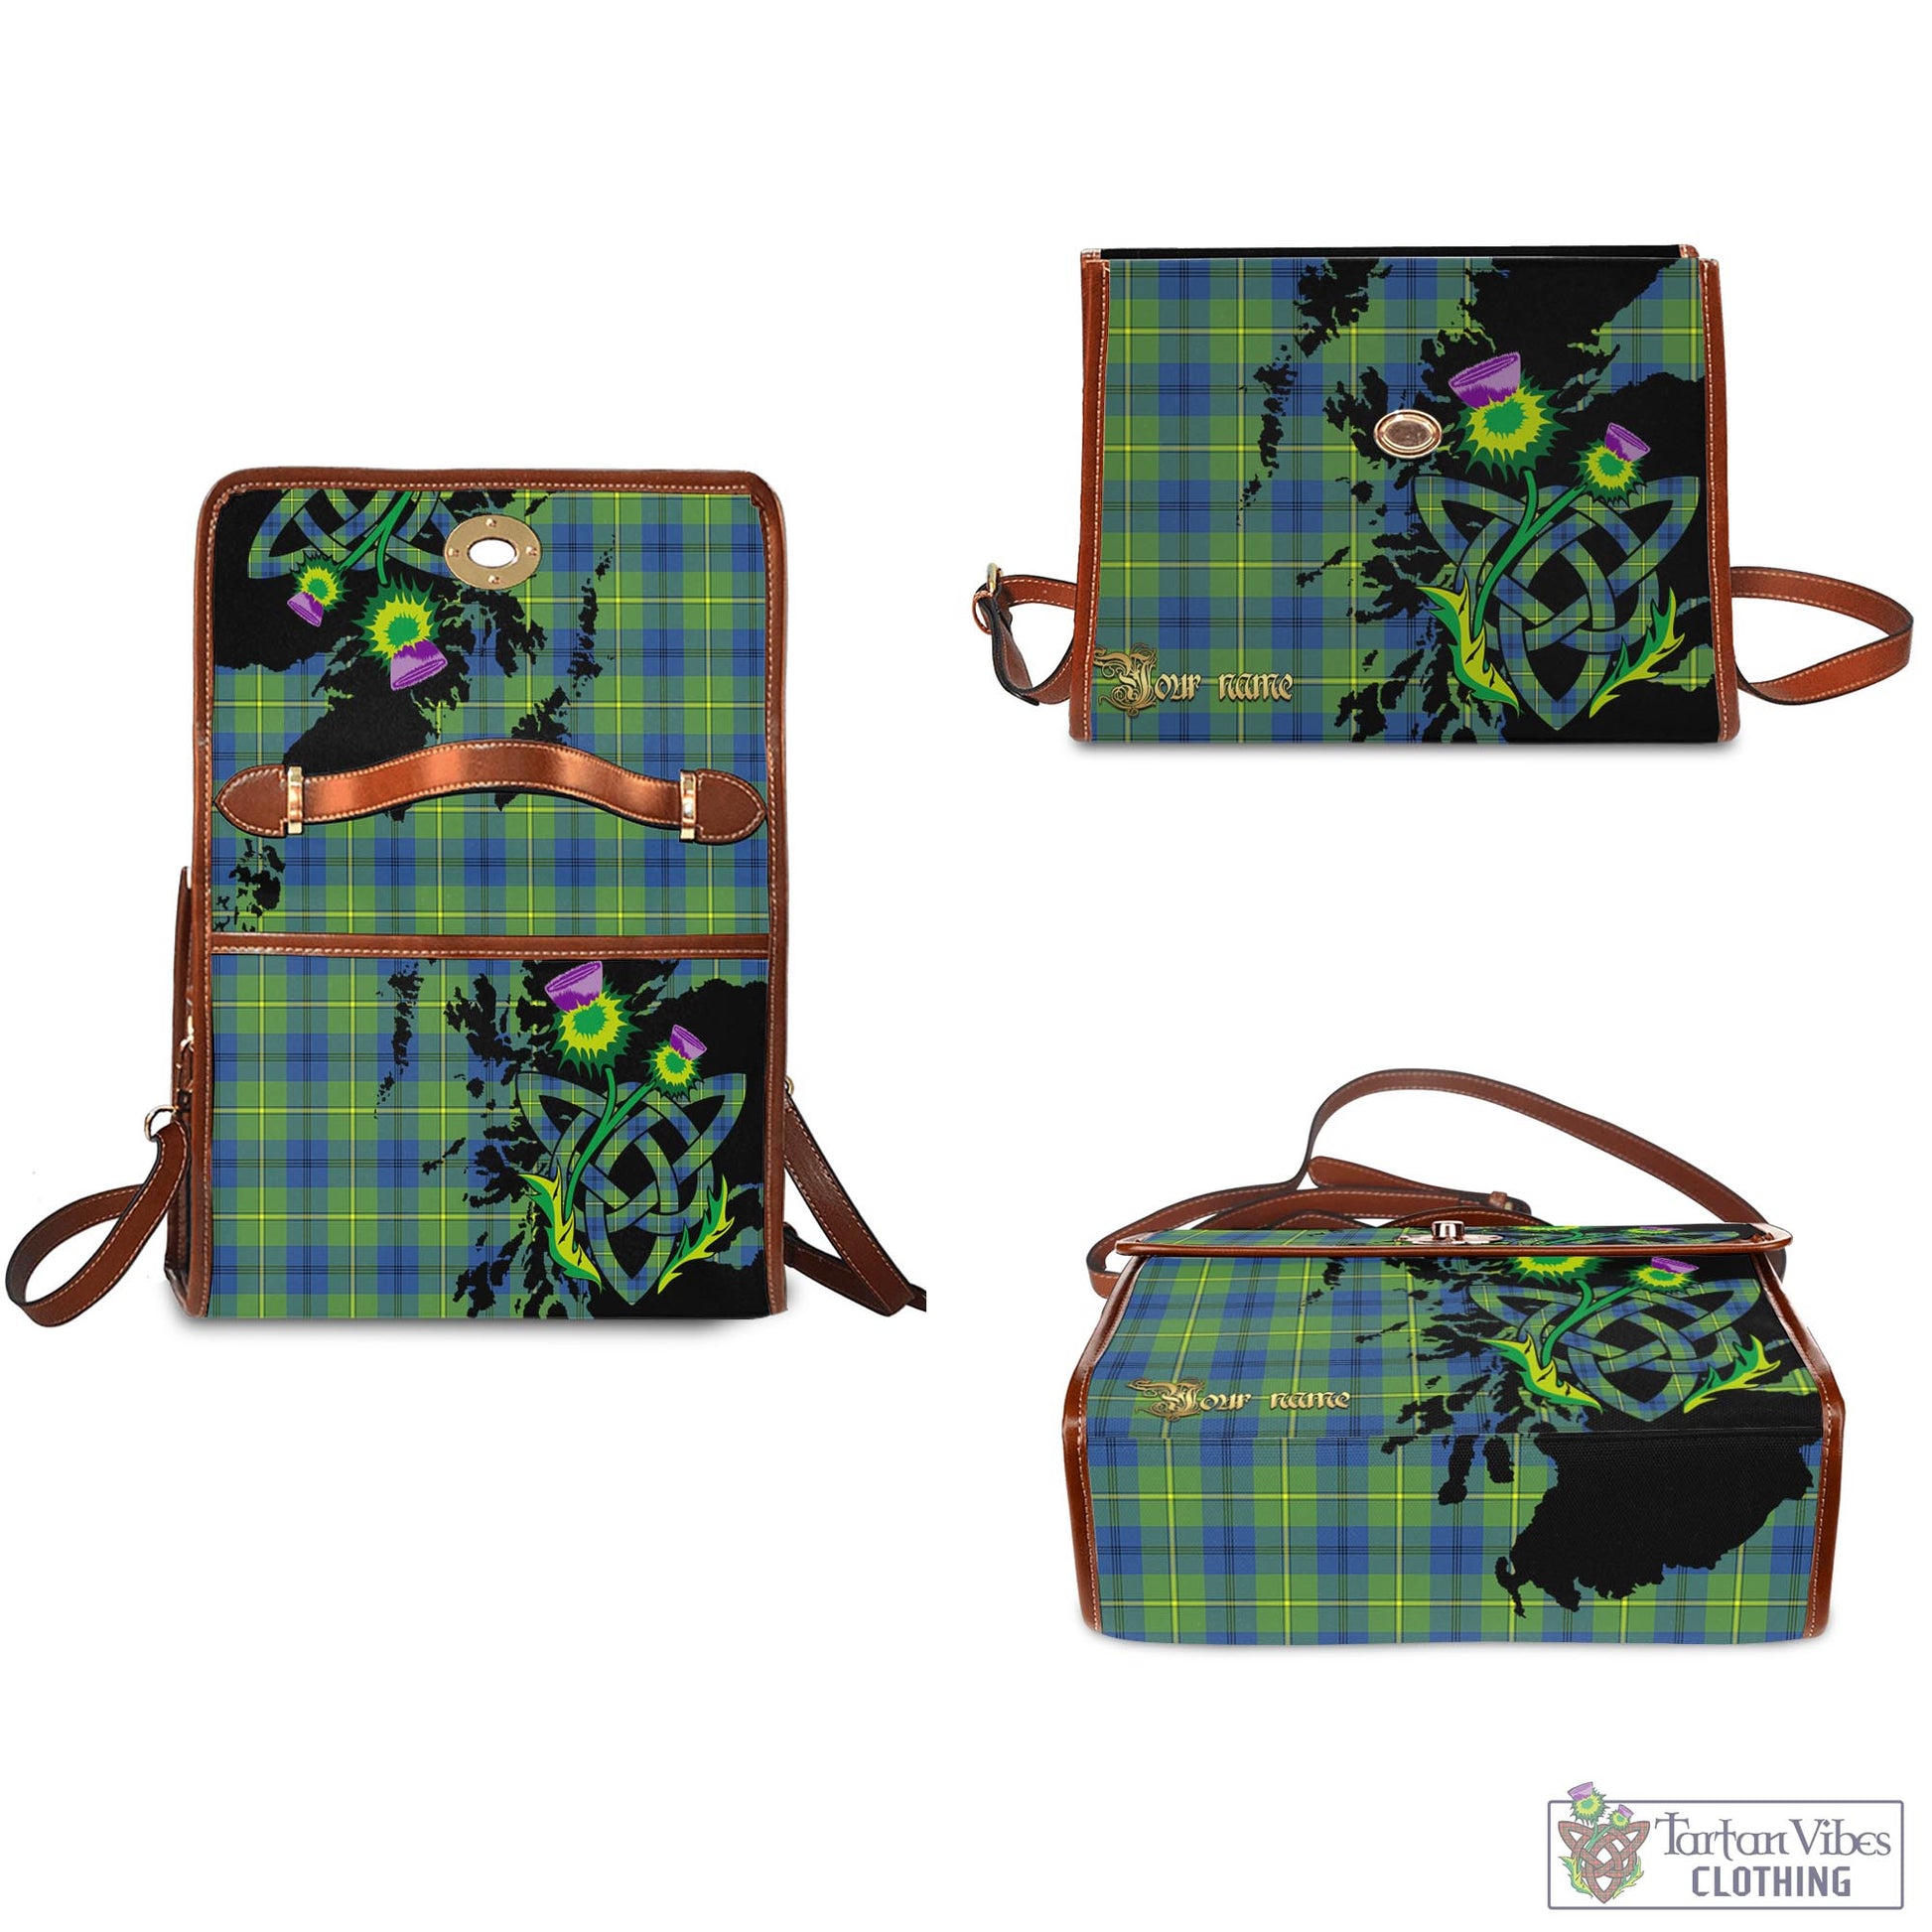 Tartan Vibes Clothing Johnstone-Johnston Ancient Tartan Waterproof Canvas Bag with Scotland Map and Thistle Celtic Accents